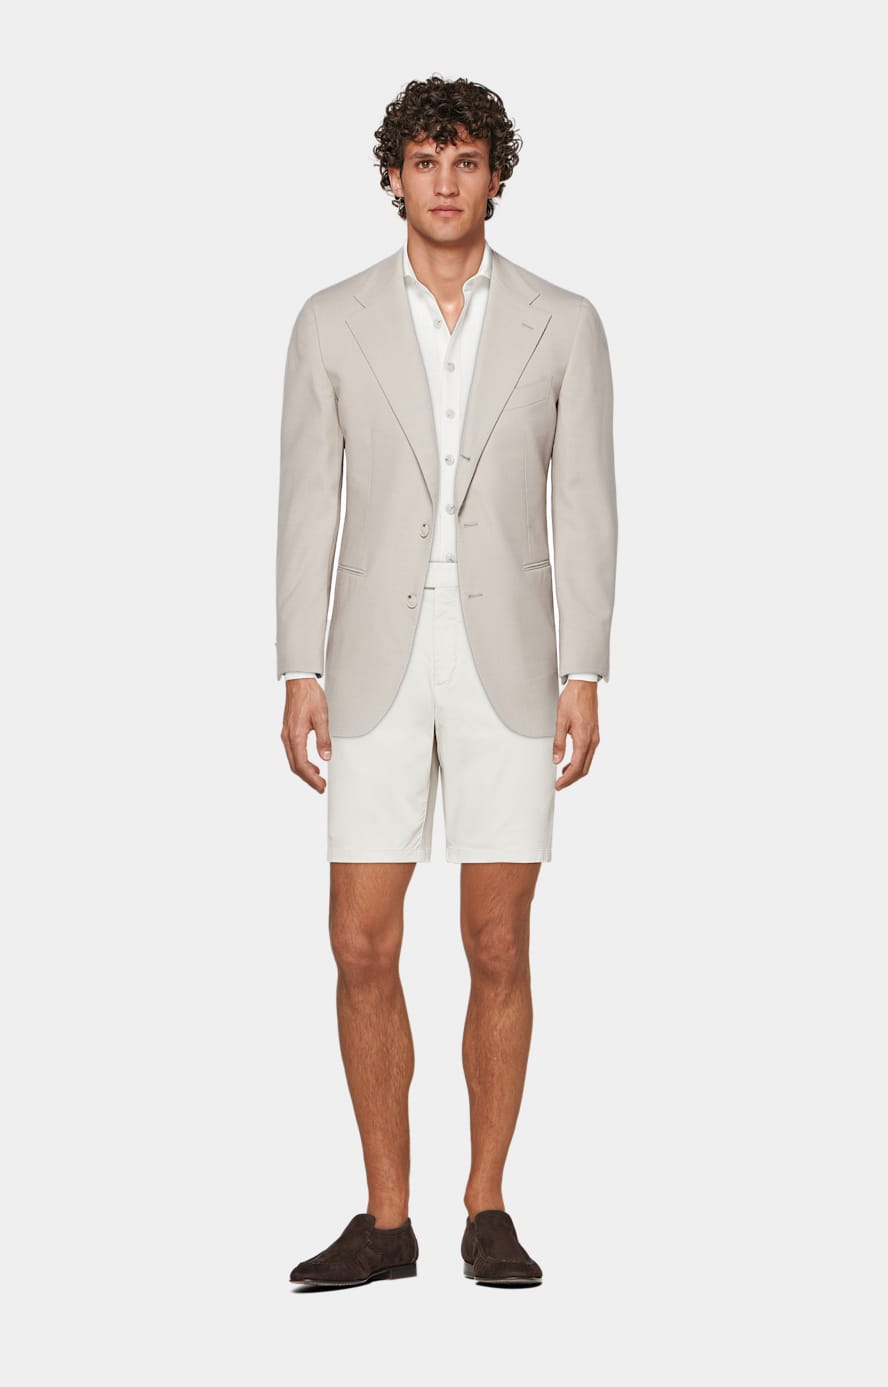 Chemise coupe tailored blanche